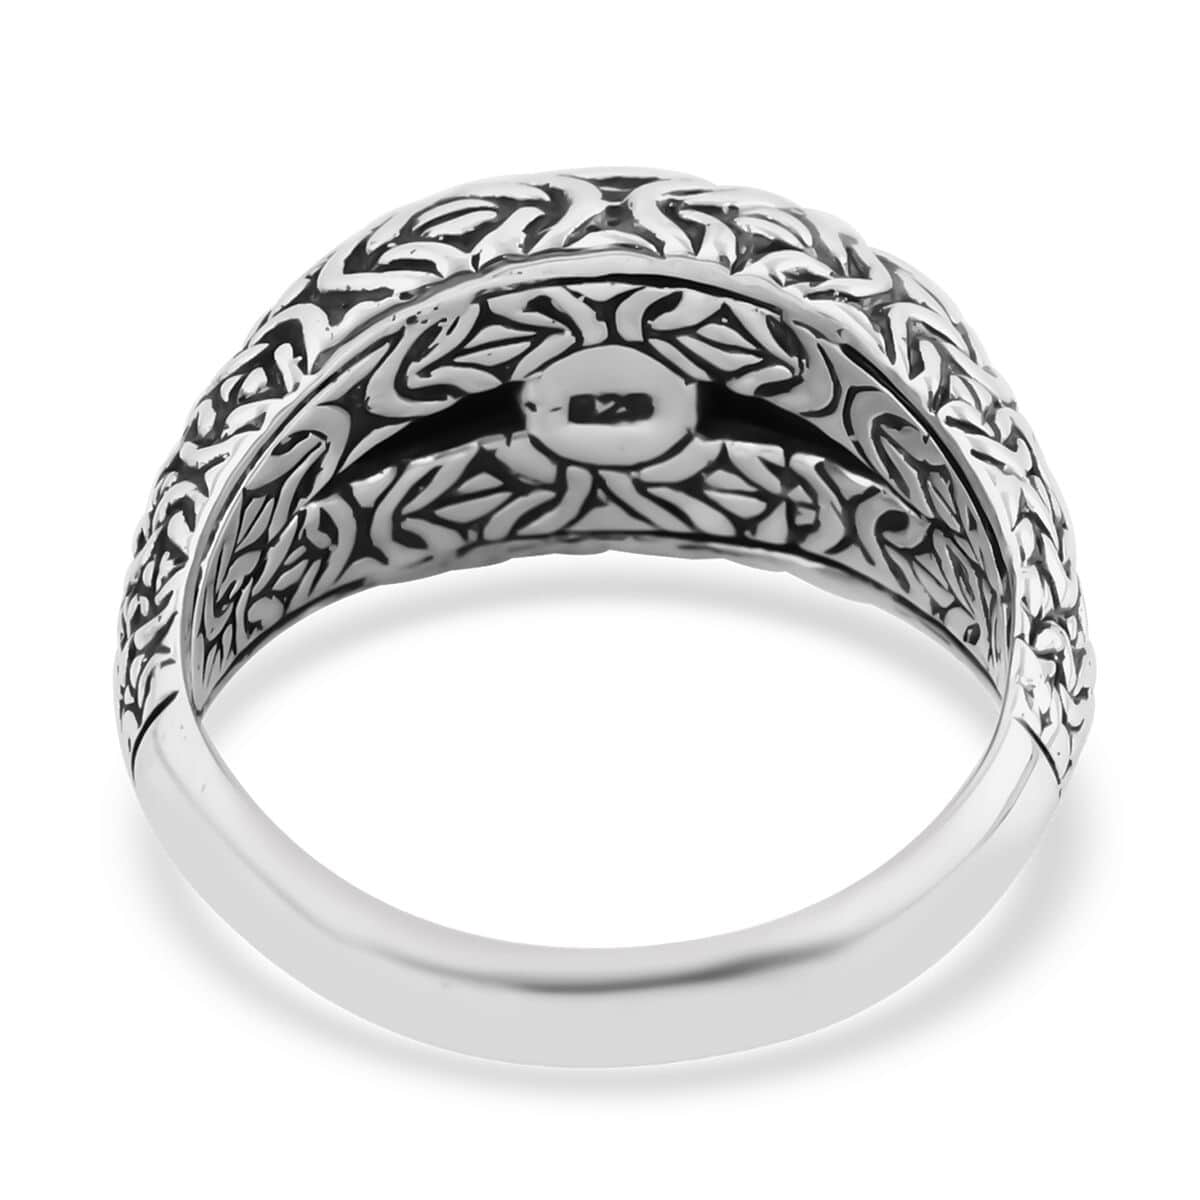 Bali Legacy Borobudur Texture Ring (Size 7) and Earrings in Sterling Silver 22.40 Grams image number 3